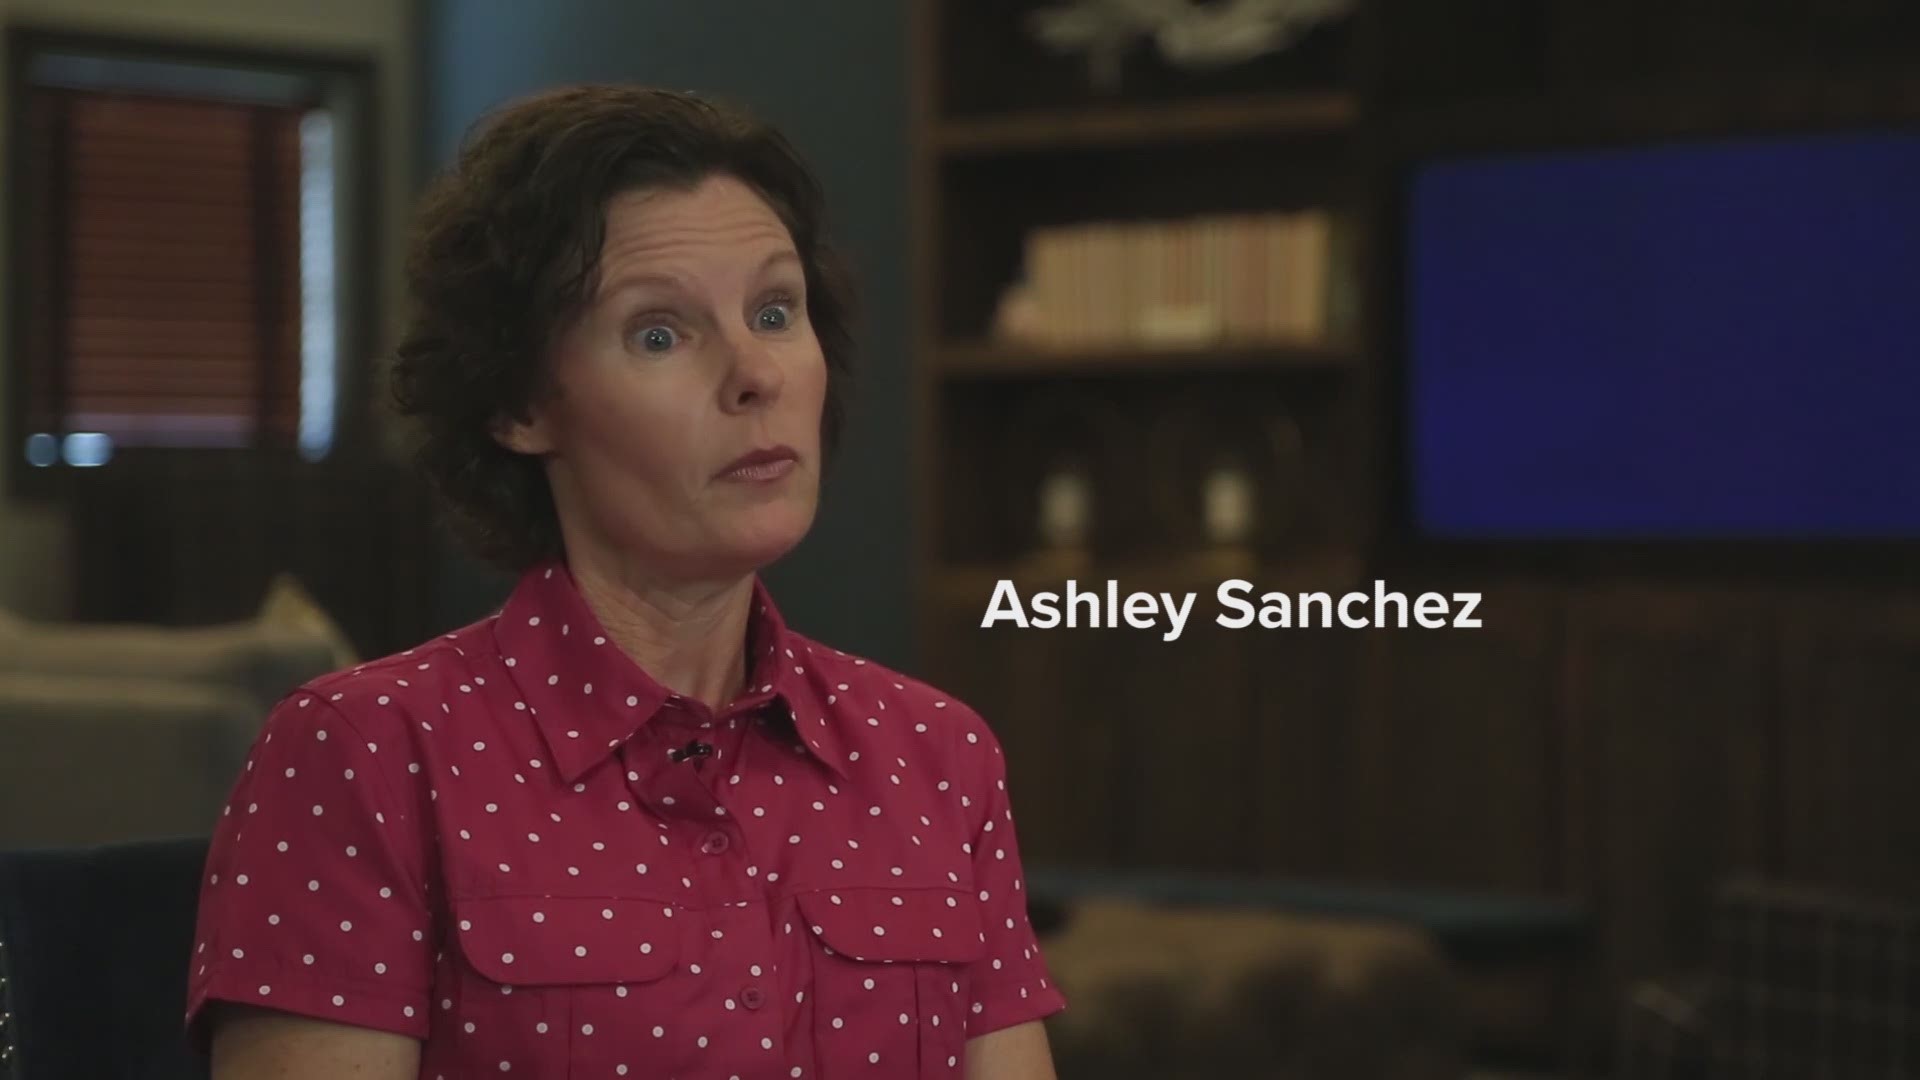 Ashley Sanchez formed Adults Independent and Motivated (AIM), a small community of active adults with intellectual and/or developmental disabilities.